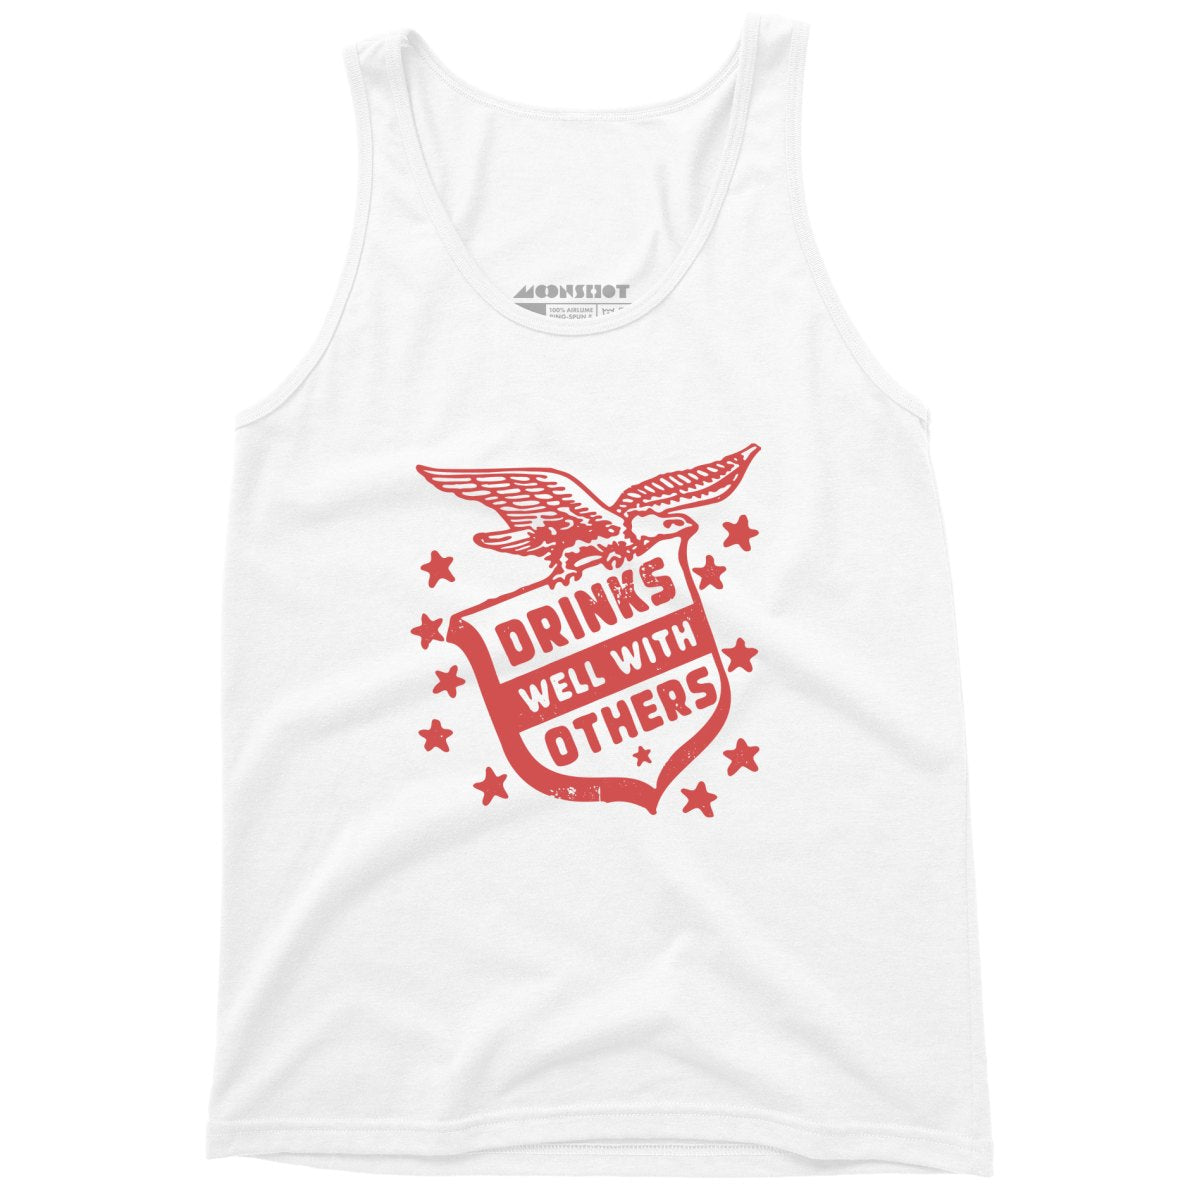 Drinks Well With Others - Unisex Tank Top